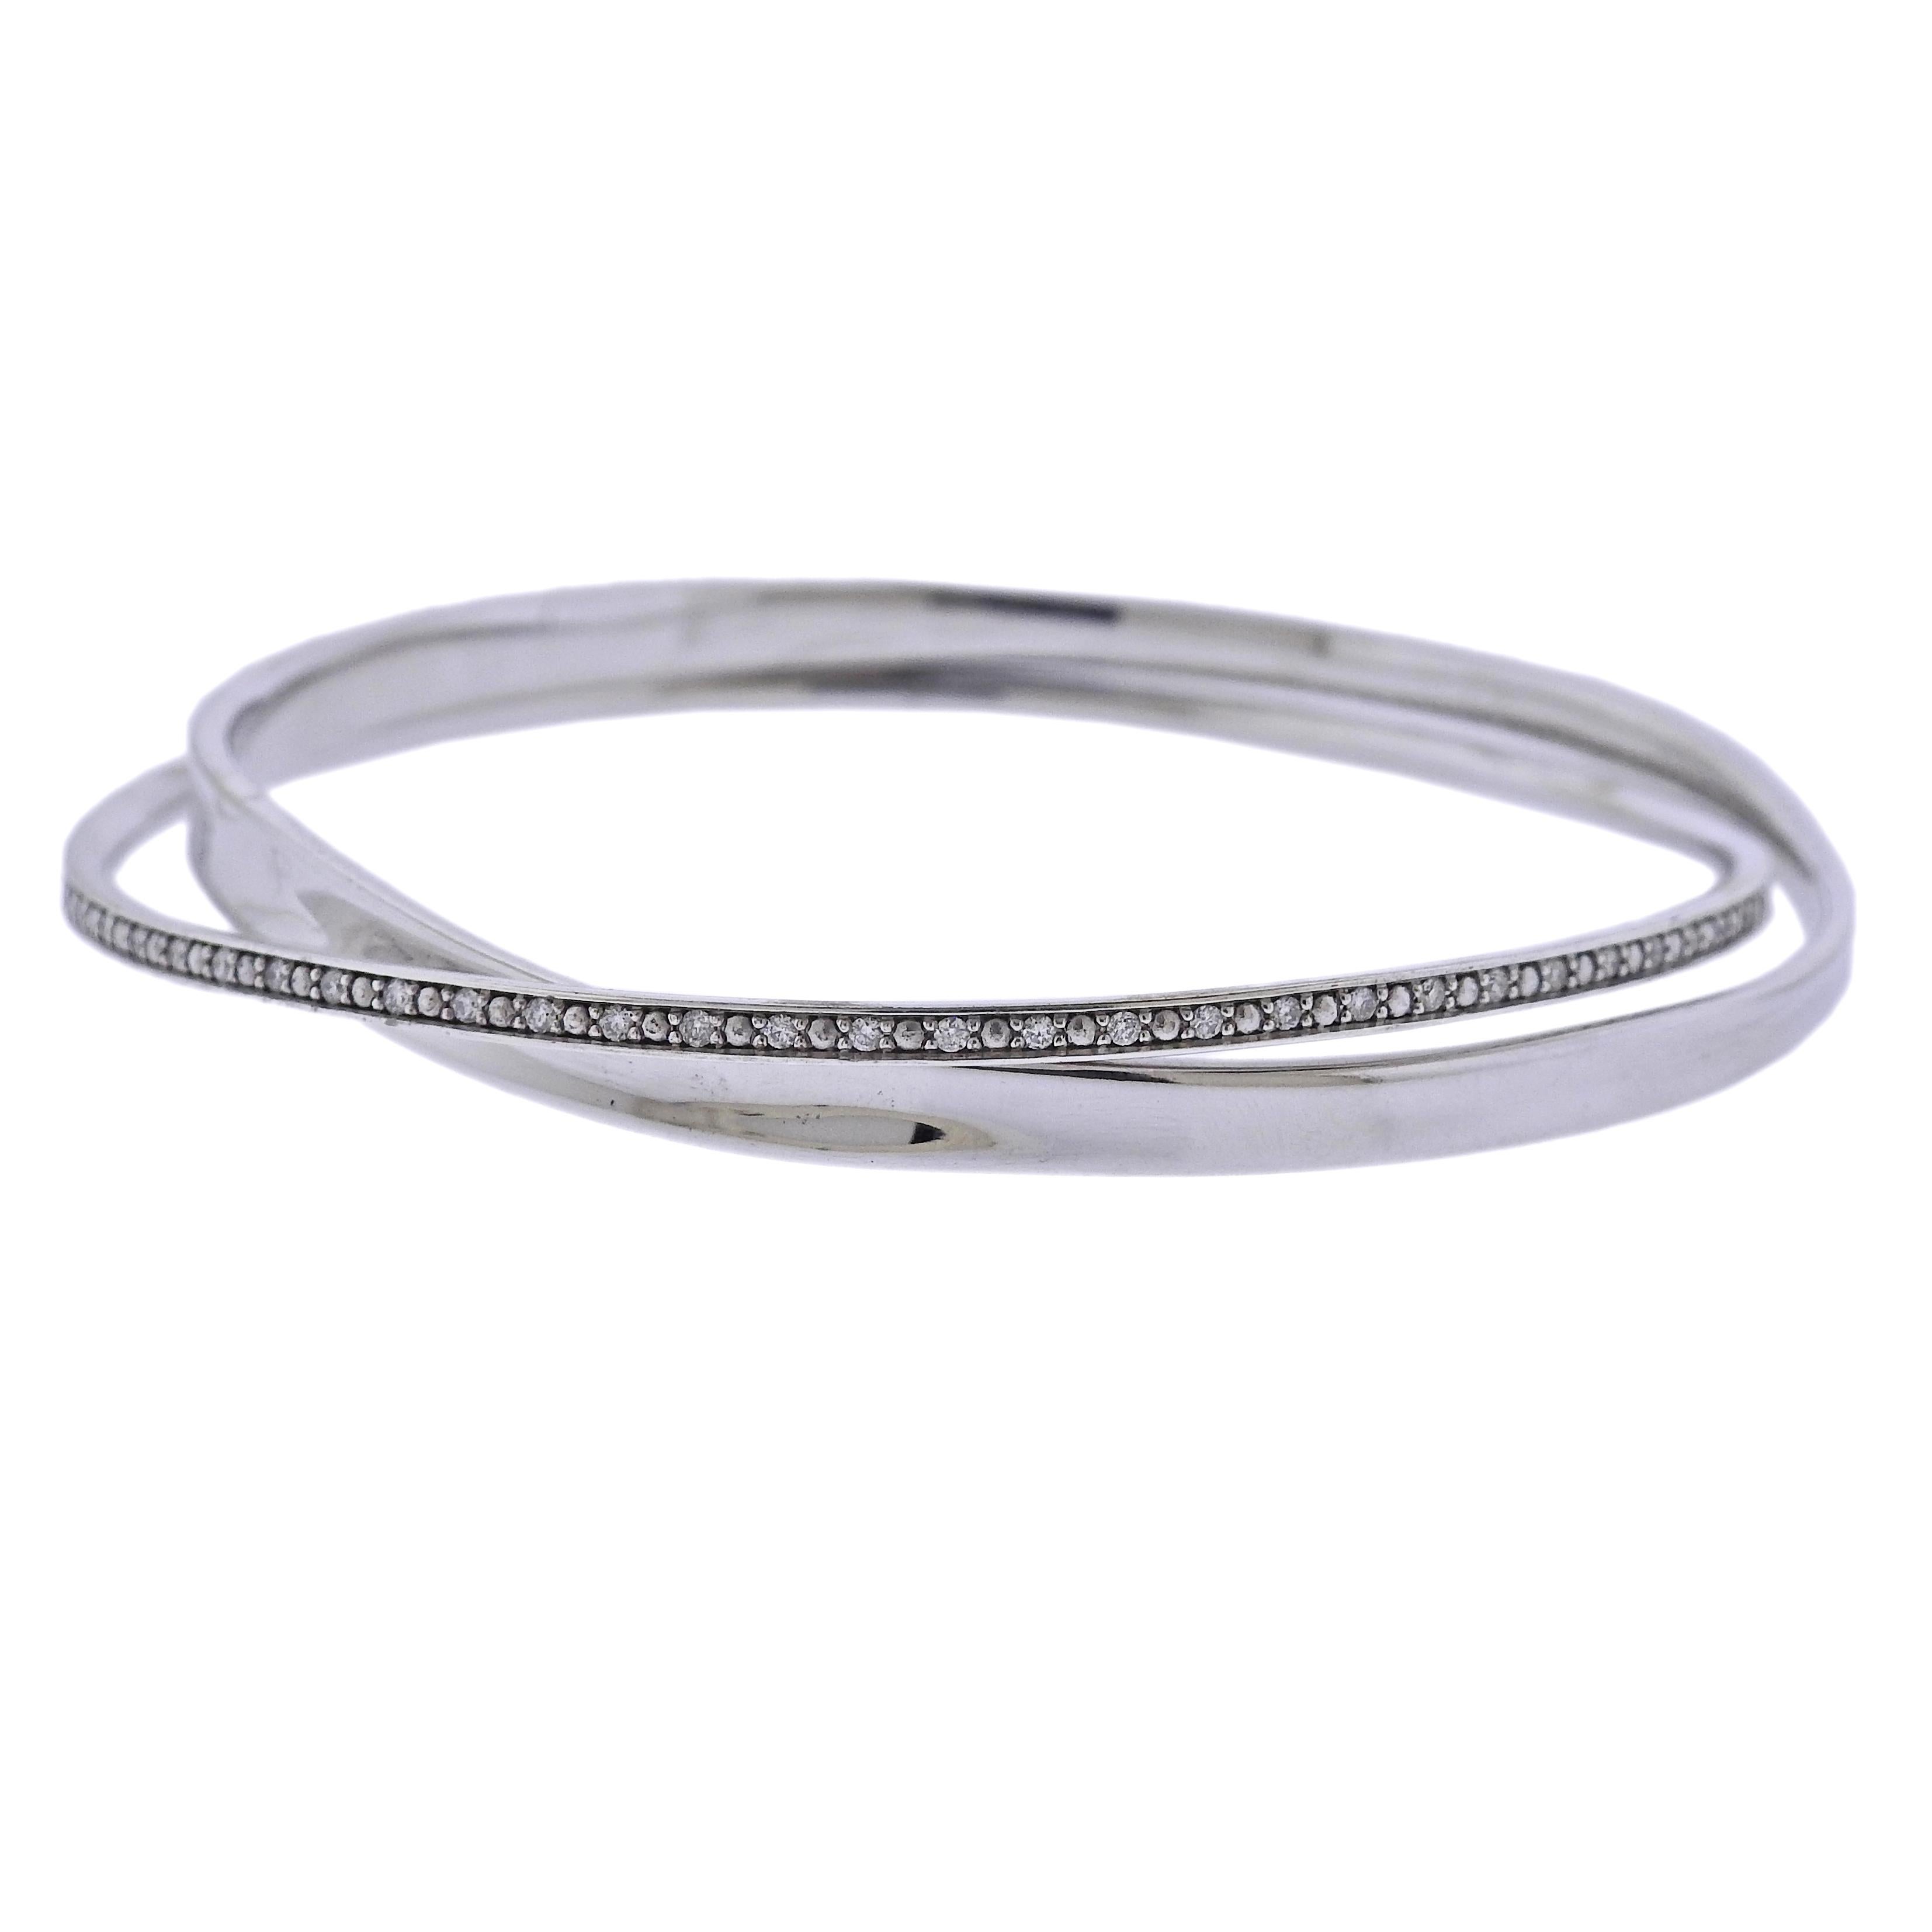 Brand new Georg Jensen sterling silver Marcia bangle bracelet with approximately 1.20ctw G/VS diamonds. Bracelet marked M for size Medium and will fit approx. 7